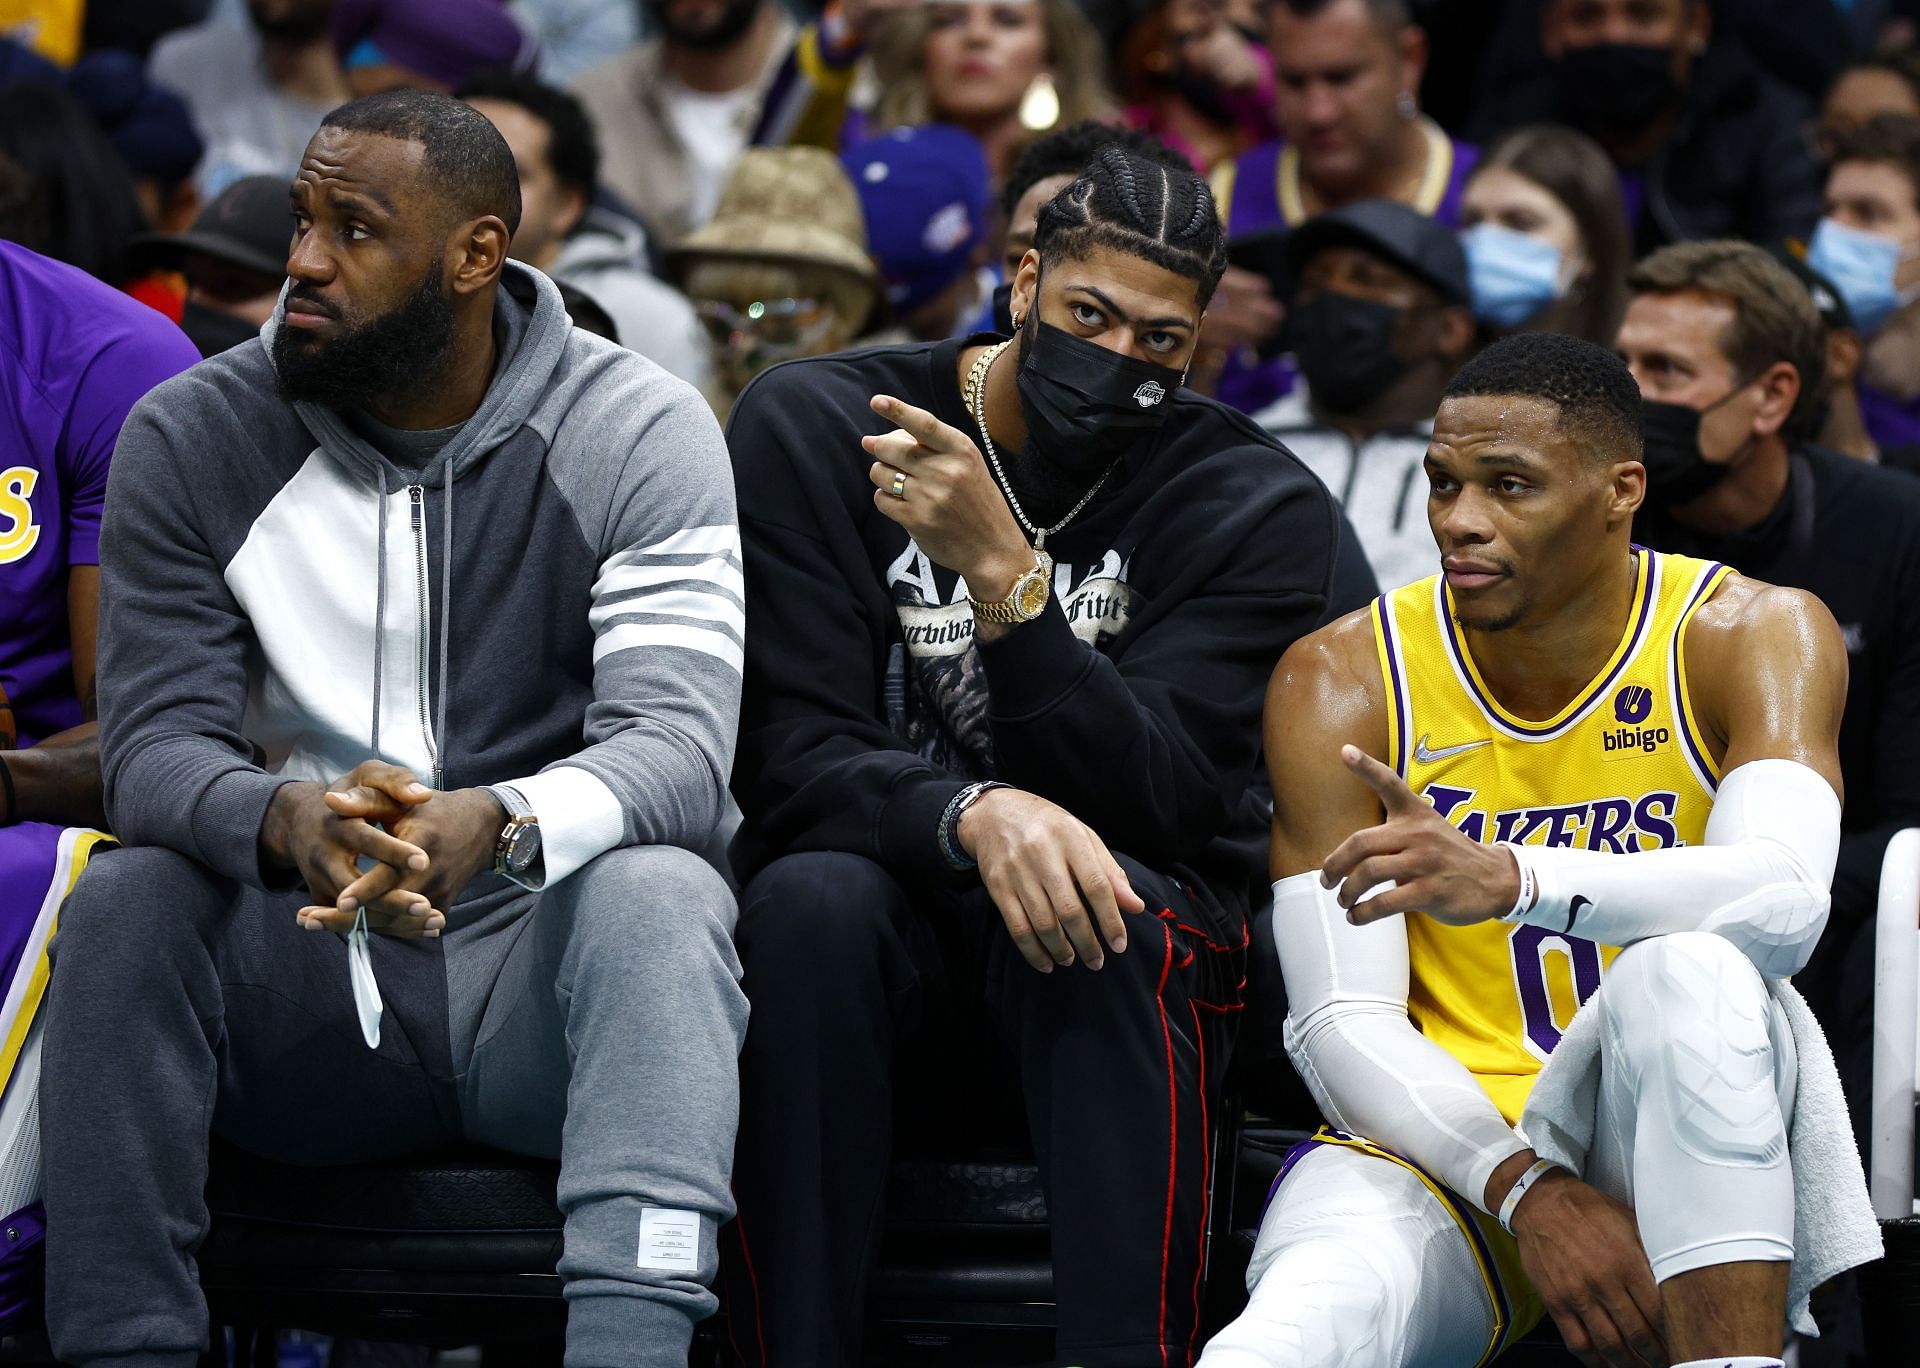 (L-R)LeBron James No. 6, Anthony Davis No. 3, and Russell Westbrook No. 0 of the LA Lakers.